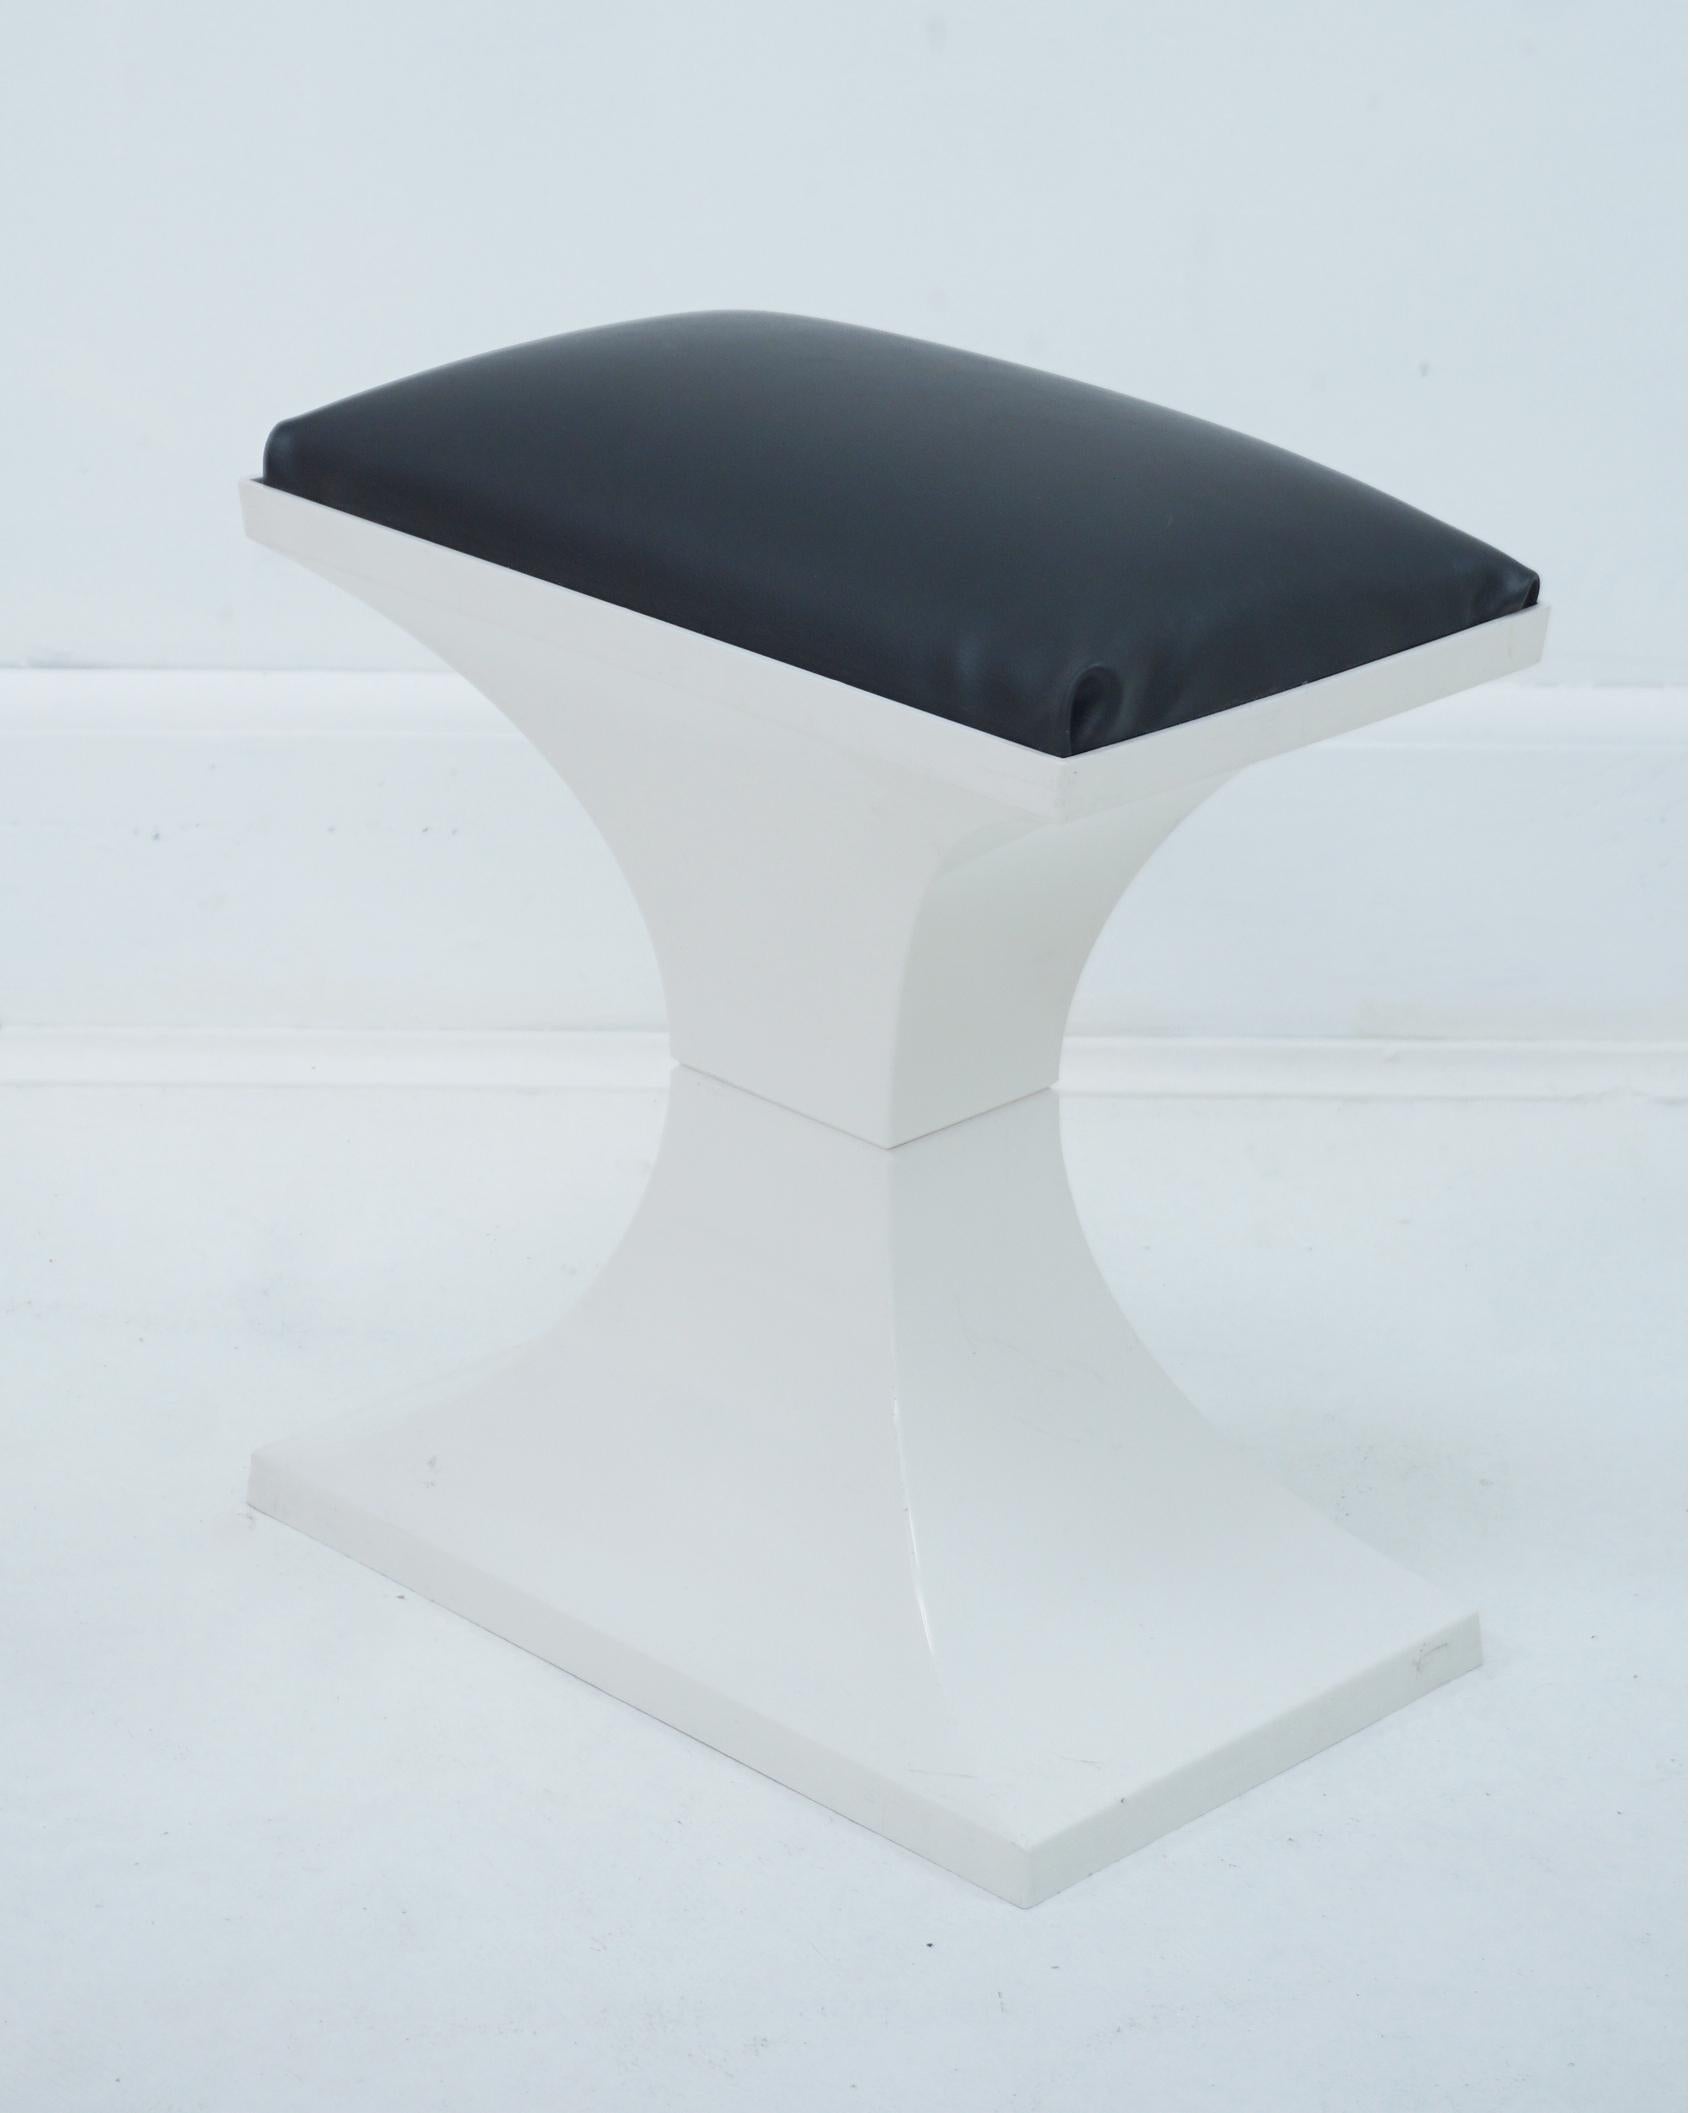 1970s Space-age Plastic and Faux Leather Stool Footrest Made in Holland For Sale 4